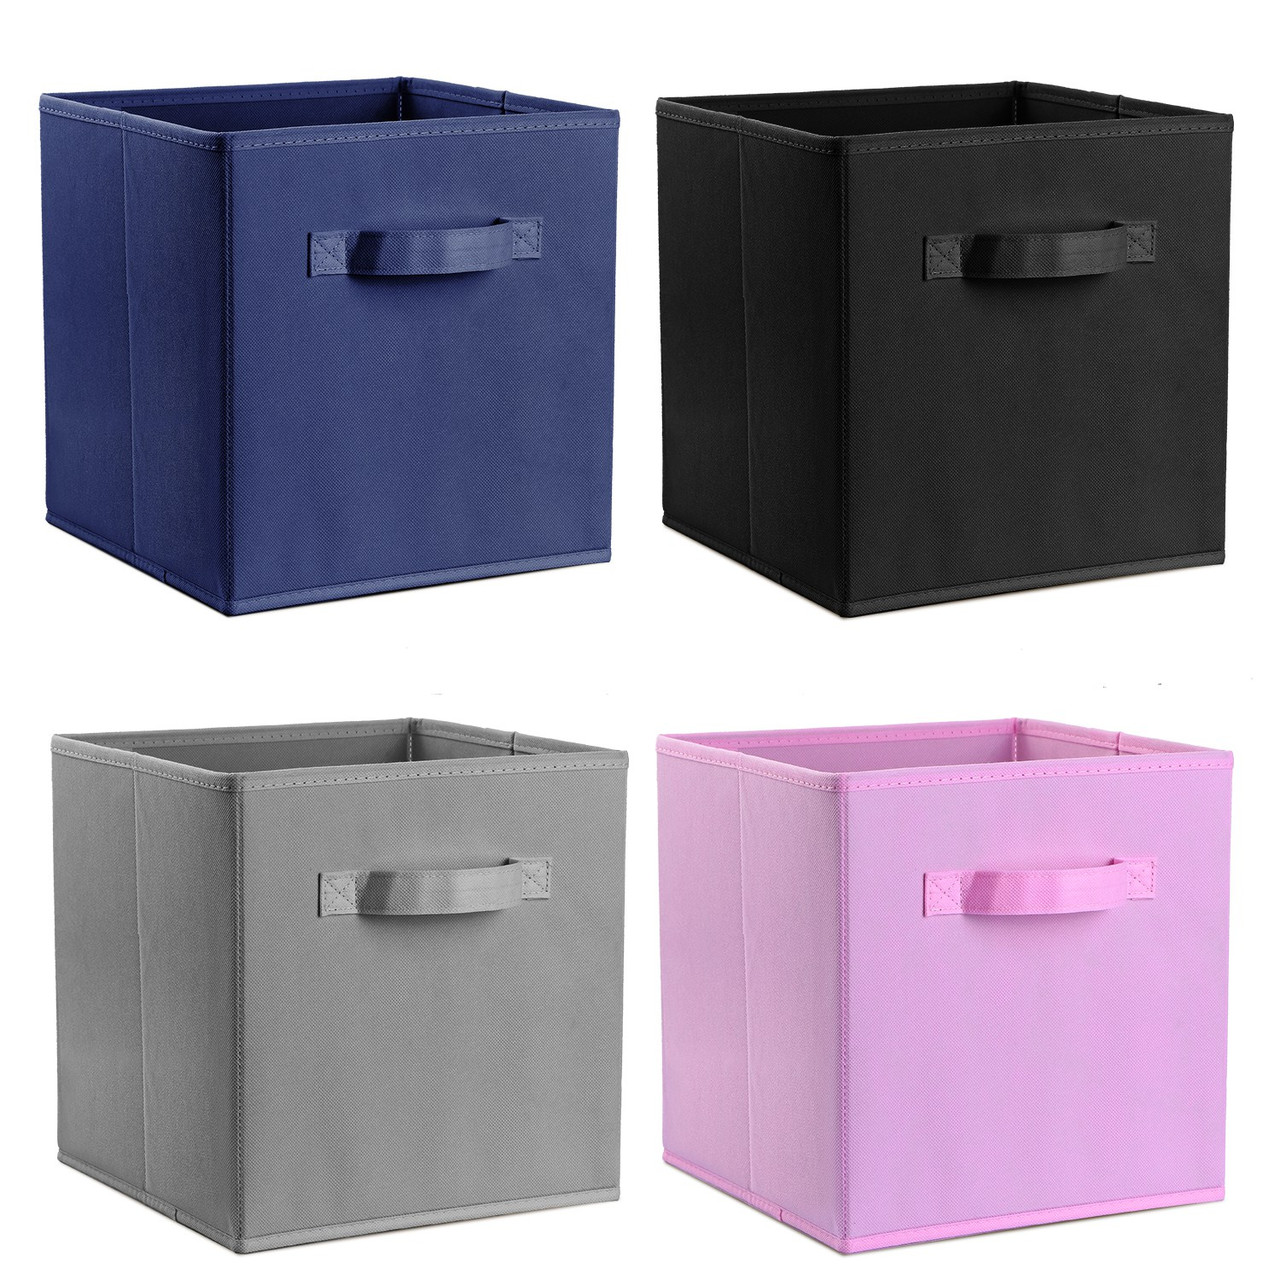 Foldable Storage Cubes (4-Pack) product image